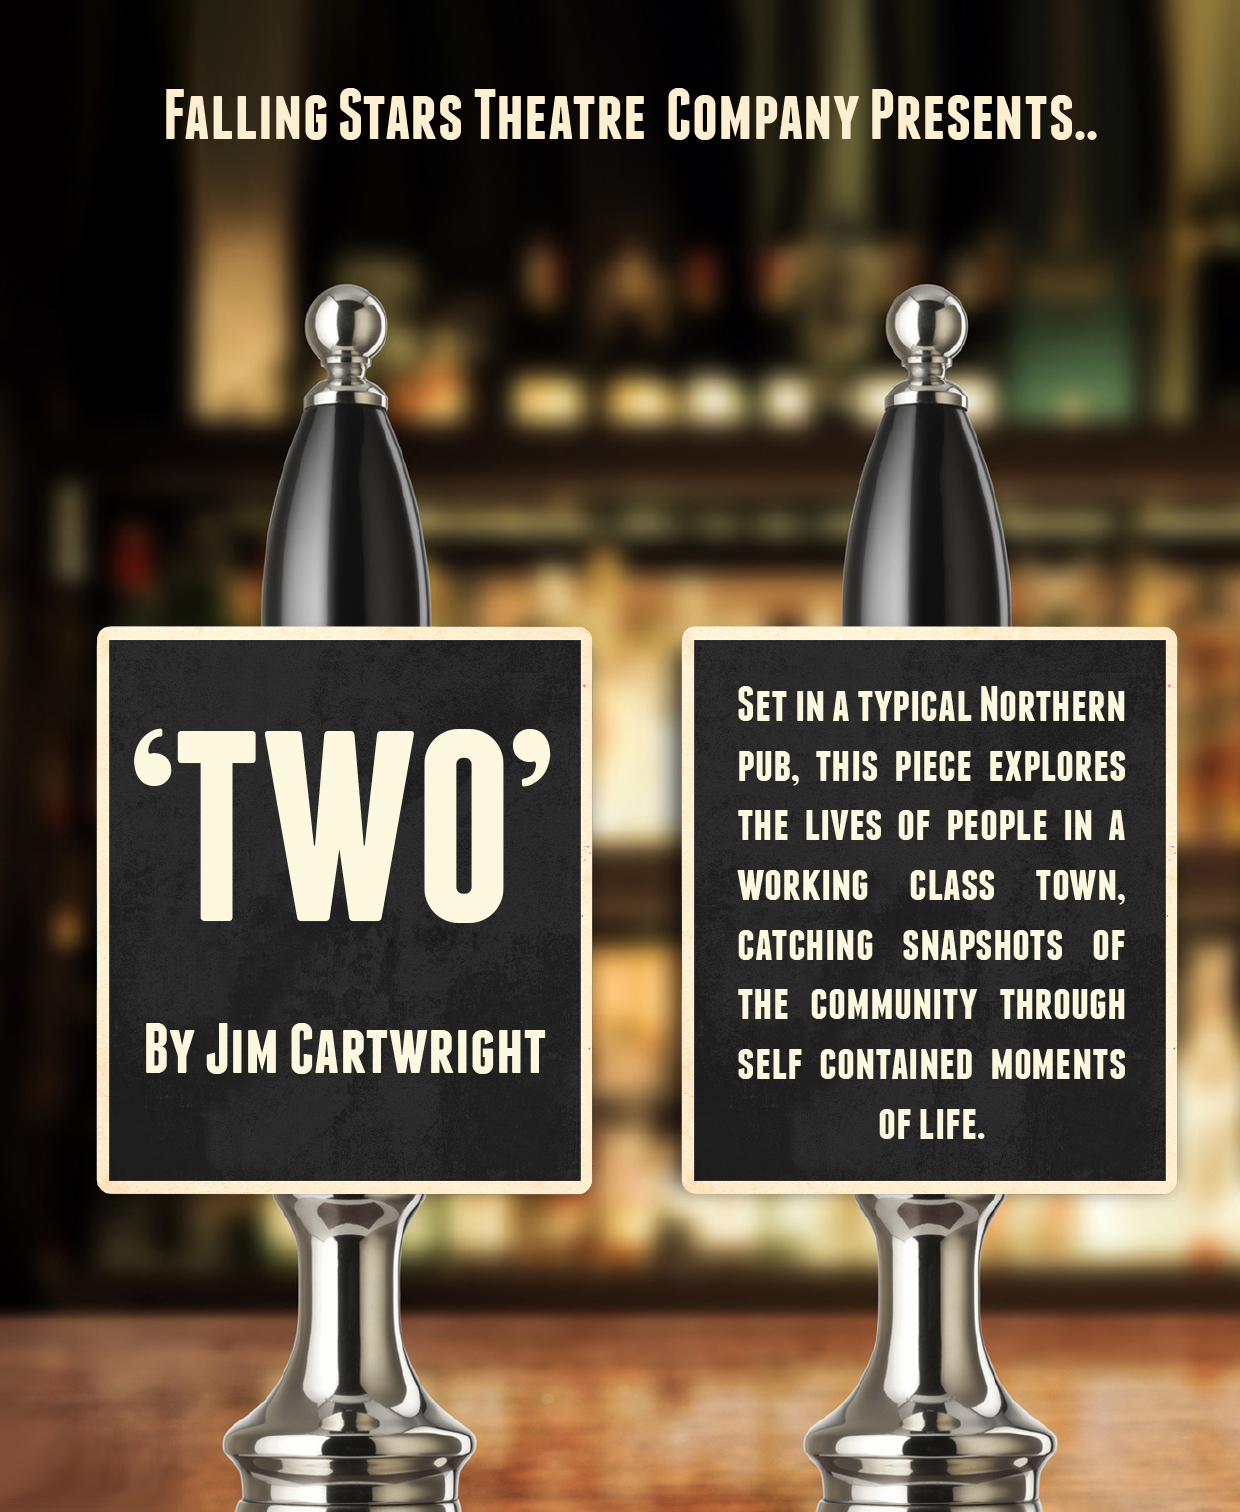 'TWO' By Jim Cartwright performed by Falling Stars Theatre. Set in a typical Northern Pub, this piece explores the lives of people in a working class town, catching snapshots of the community through self contained moments of life.